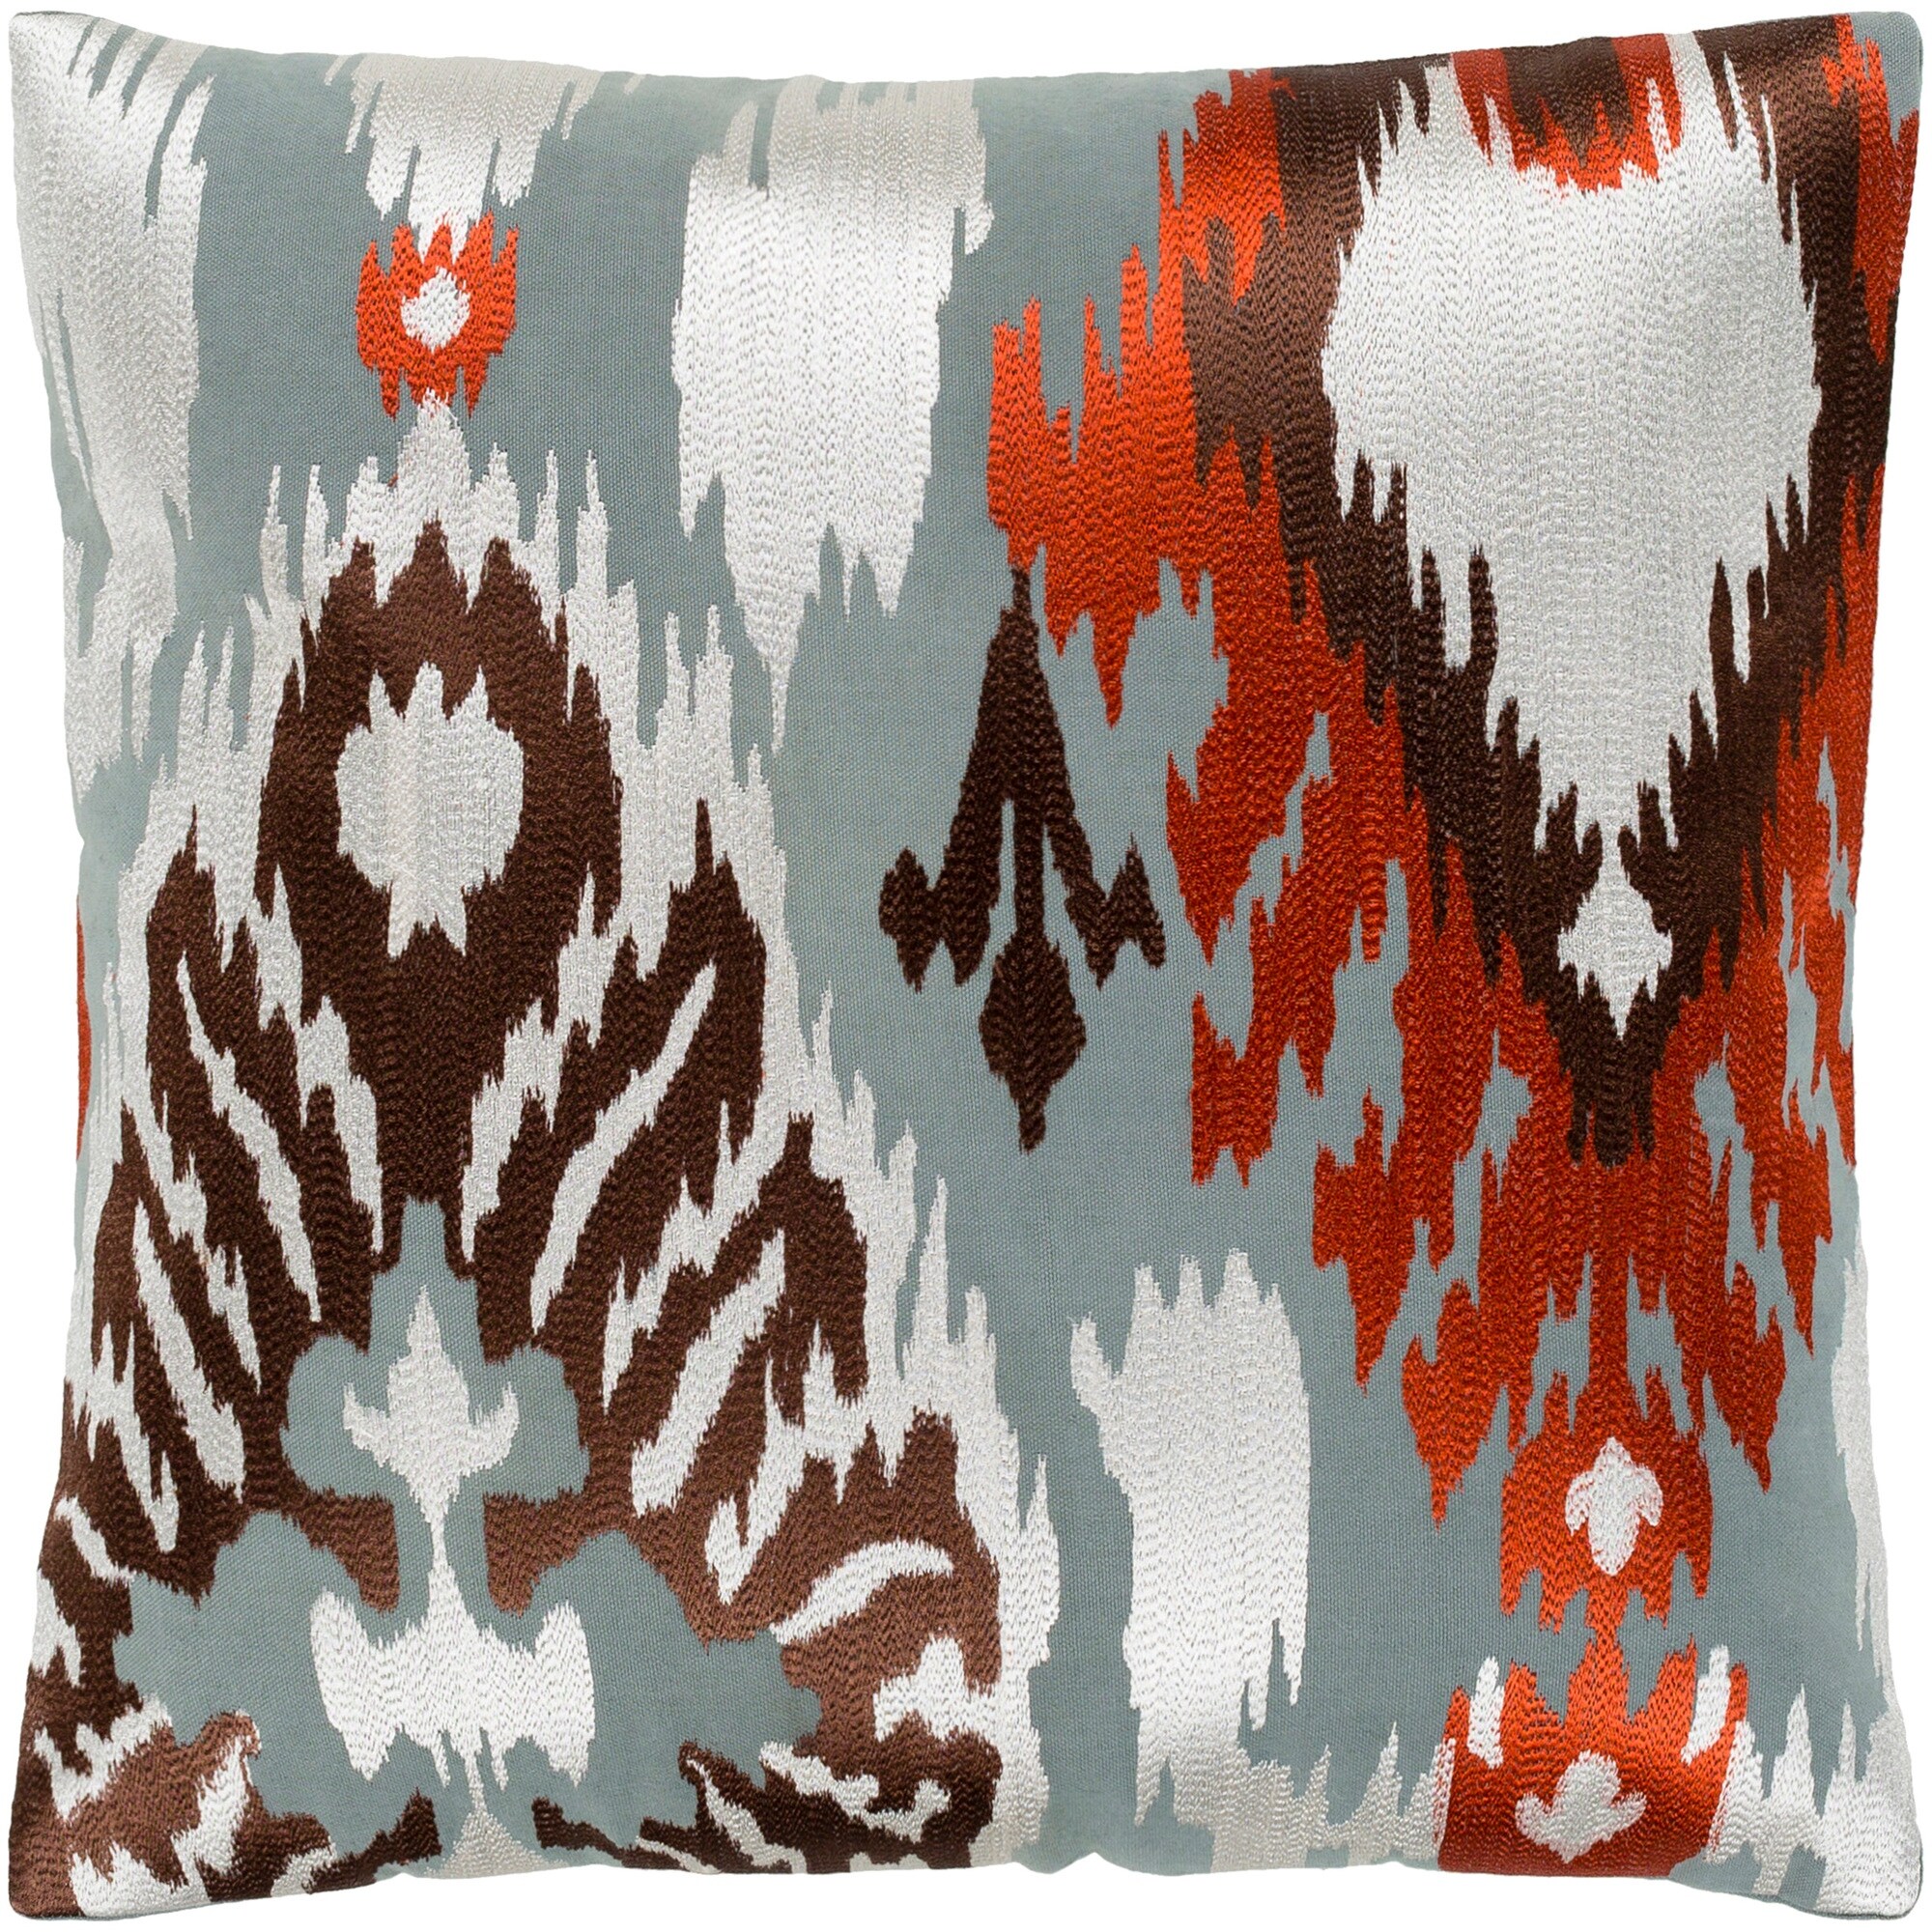 Dobra Rust & Grey Embroidered Ikat Throw Pillow Cover (20" x 20")